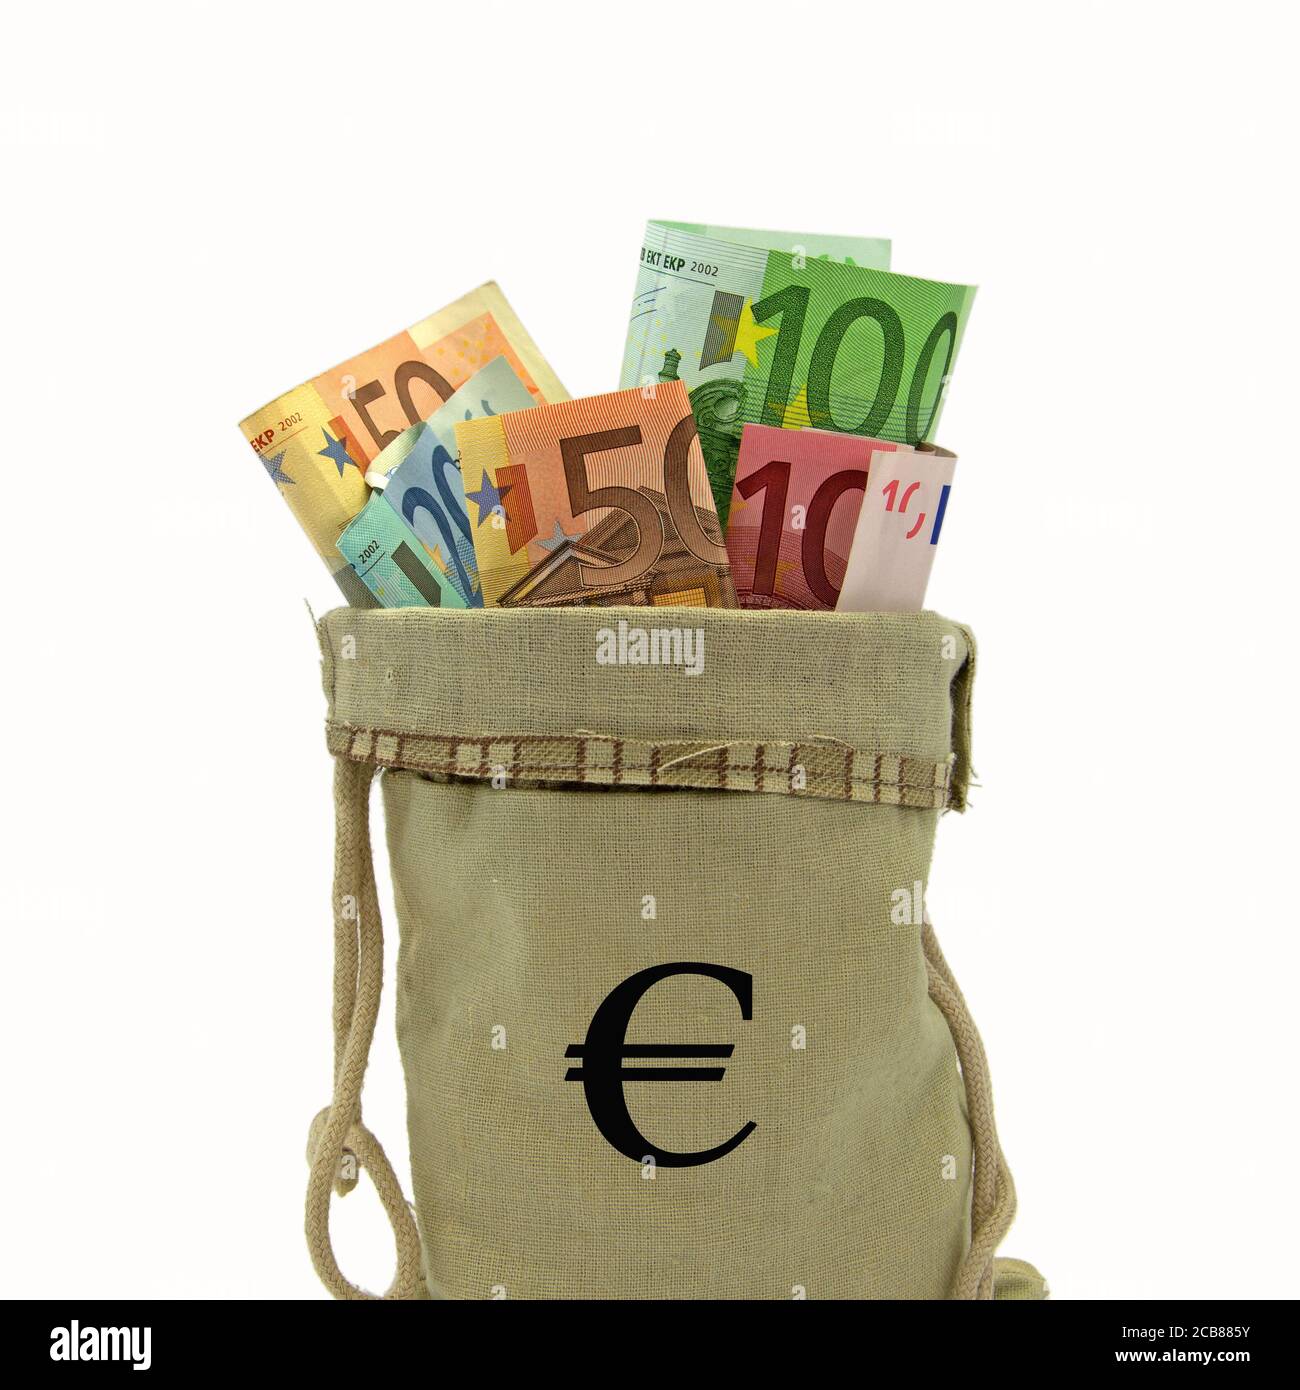 Money Bag High Resolution Stock Photography and Images - Alamy